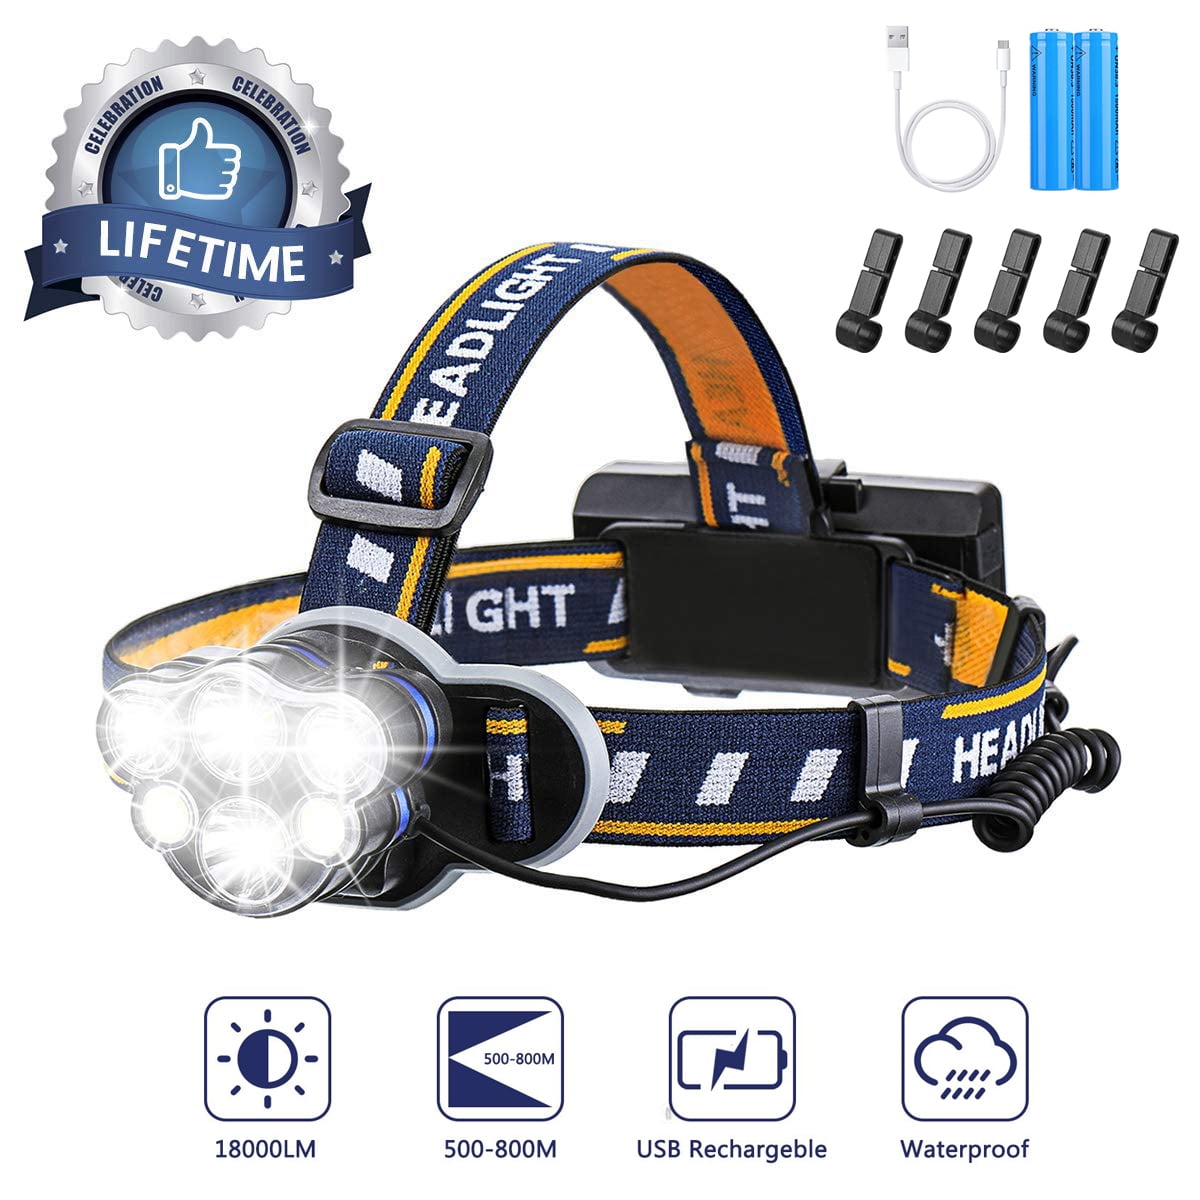 Hapop Head Torch,Waterproof Headlight with Red Warning Light USB Rechargeable Led Headlamp,8 Modes Lightweight LED Night Light Flashlight with Warning lamp SOS Strobe for Camping Fishing Running